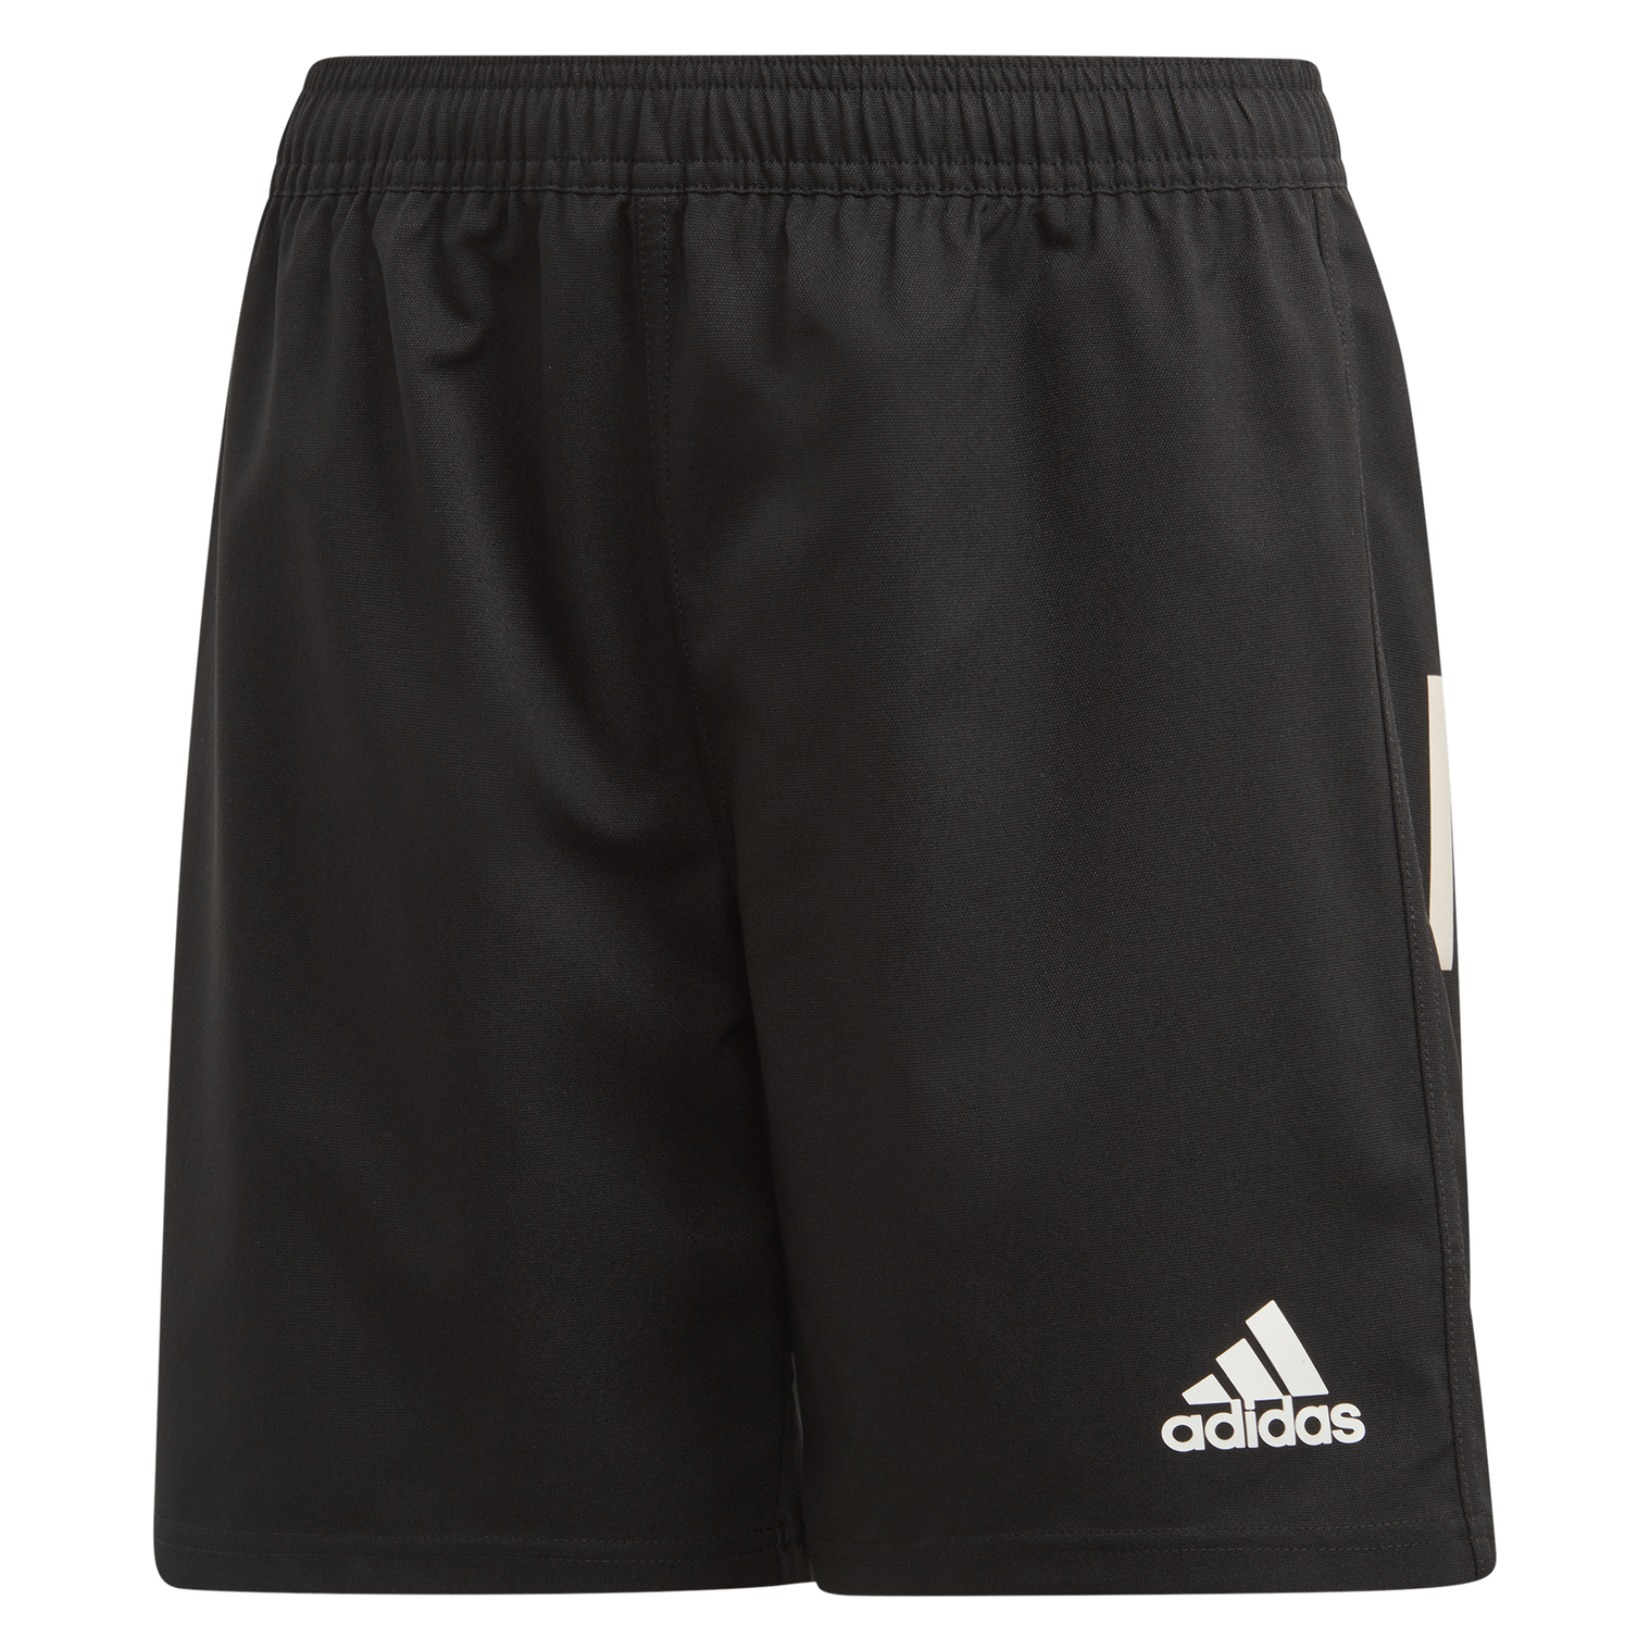 adidas Kids Classic 3S Rugby Shorts